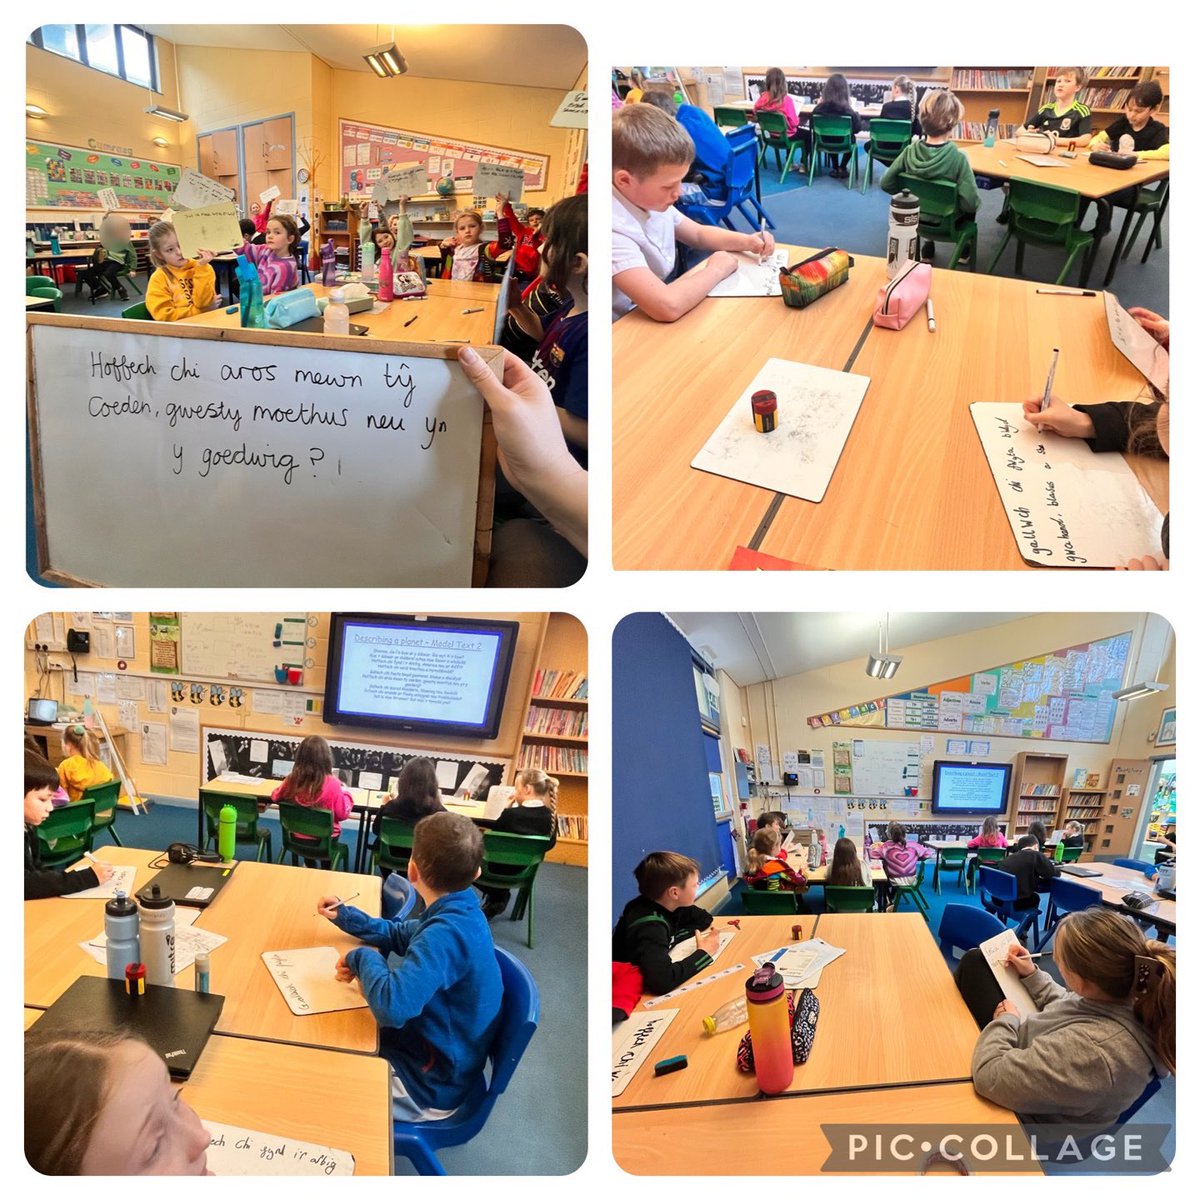 Porthlysgi were delighted to find out that today’s Welsh game was ‘Darllen dy Feddwl’. The aim of the game is for the pupils to guess which sentence the teacher chose from the model text, all while developing their welsh reading, writing and oracy skills! @CymraegSB